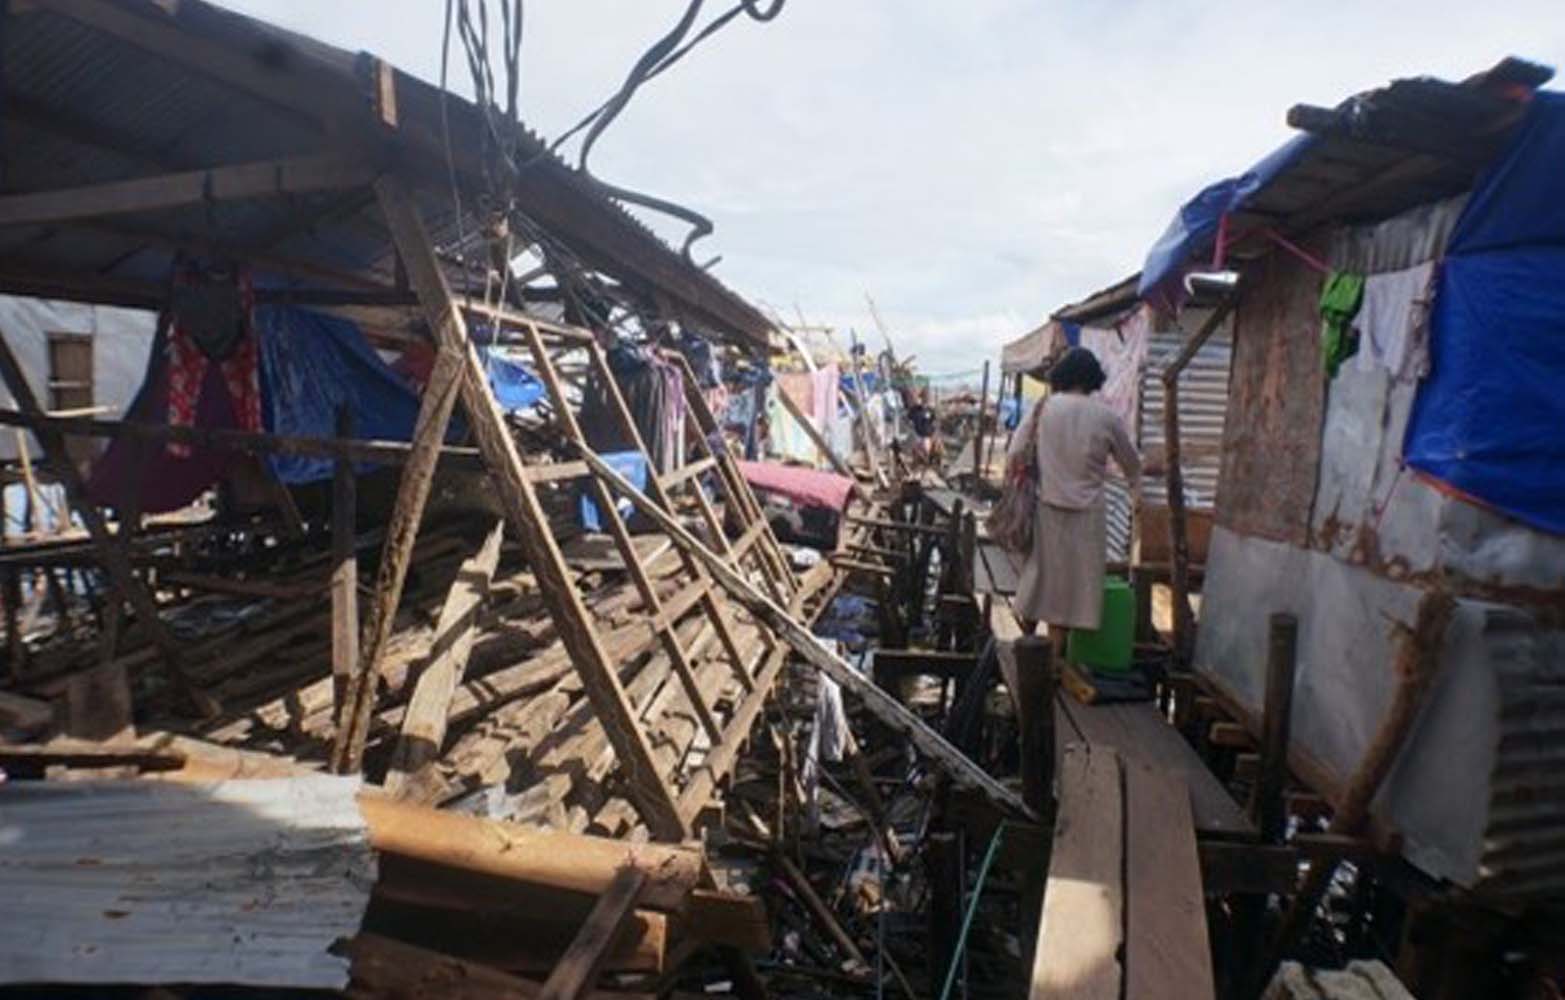 Situation of the Badjao stilt homes in the typhoon aftermath in Surigao City.